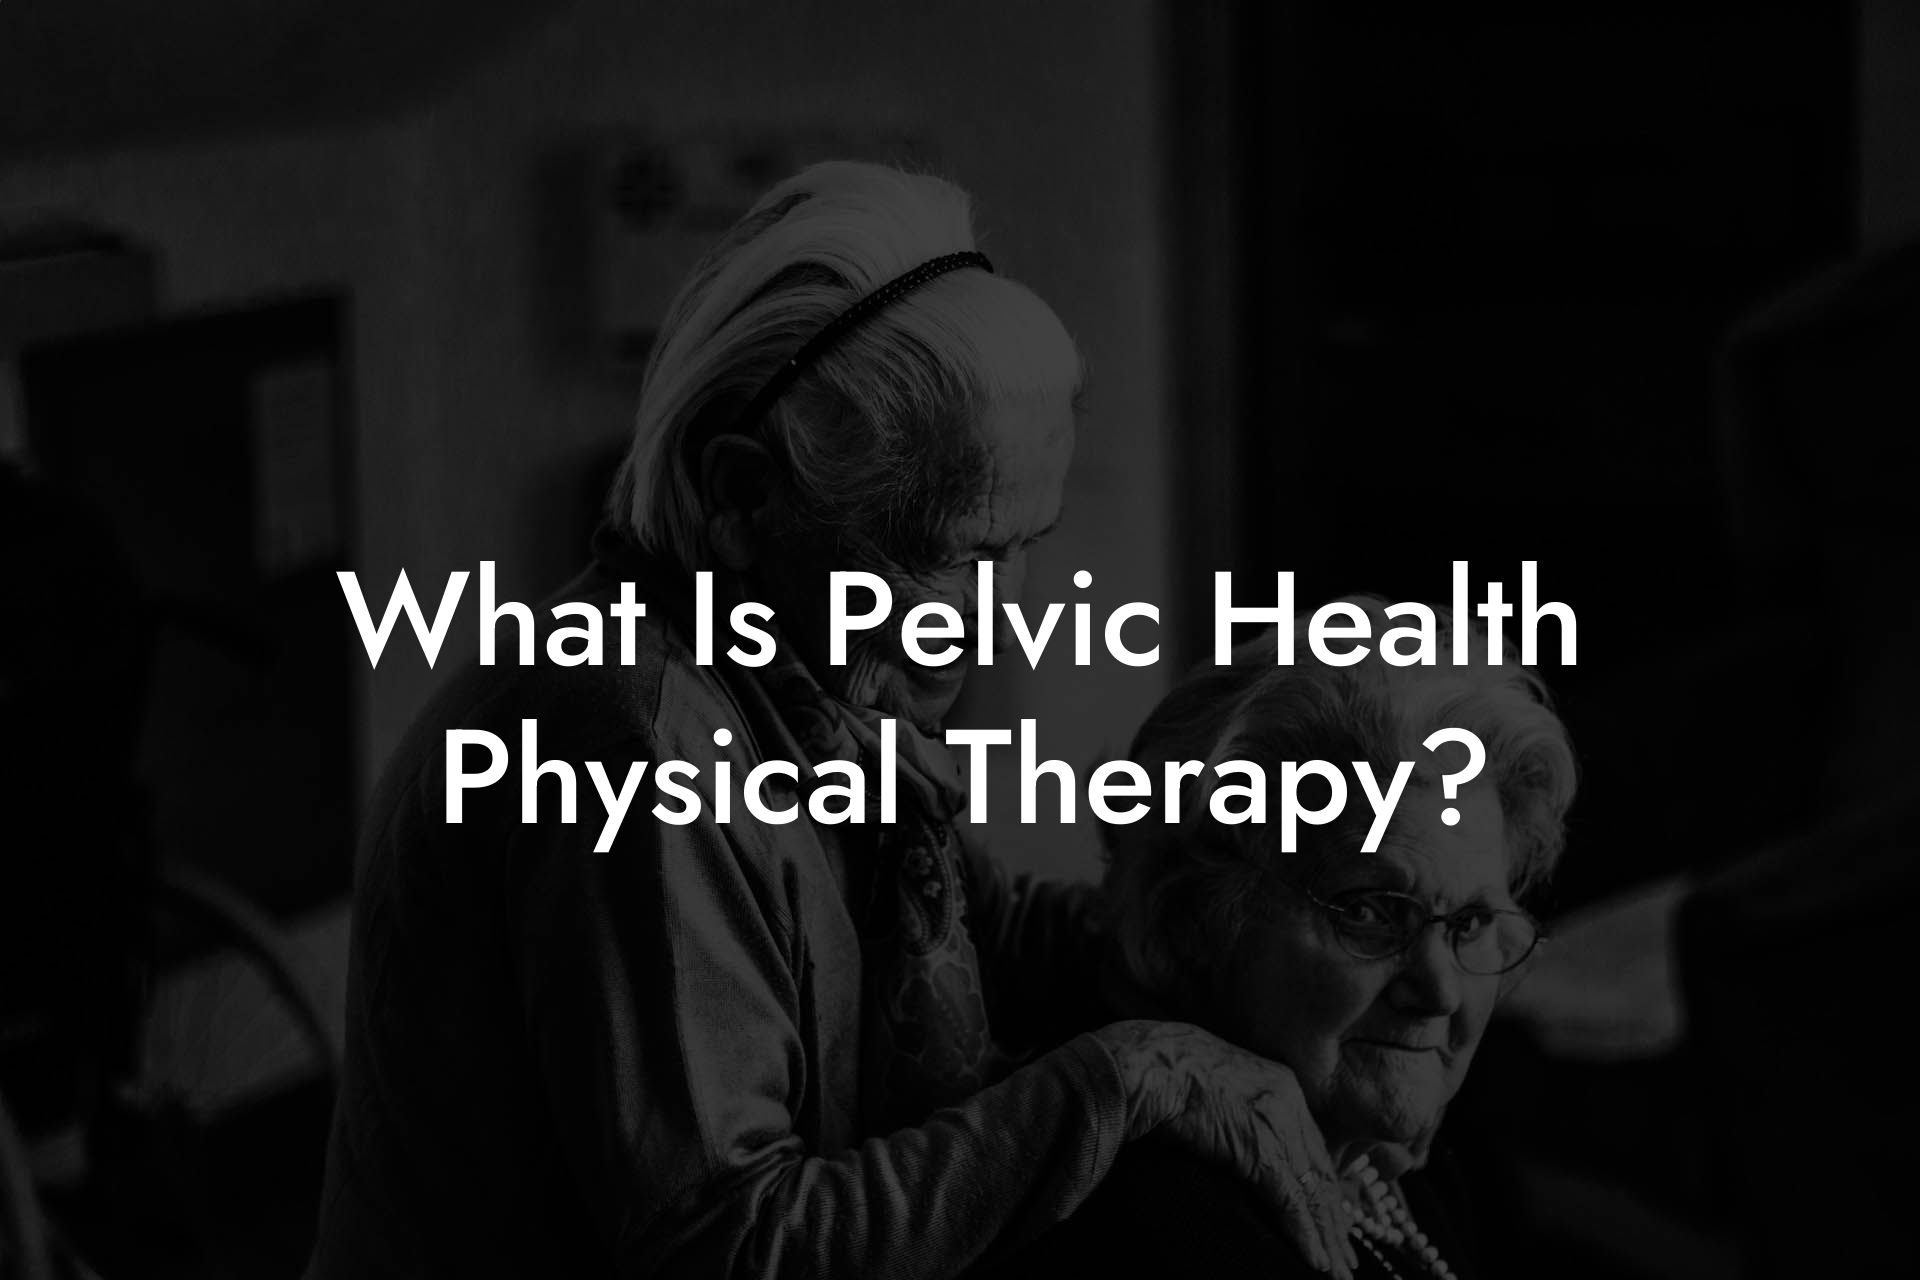 What Is Pelvic Health Physical Therapy?